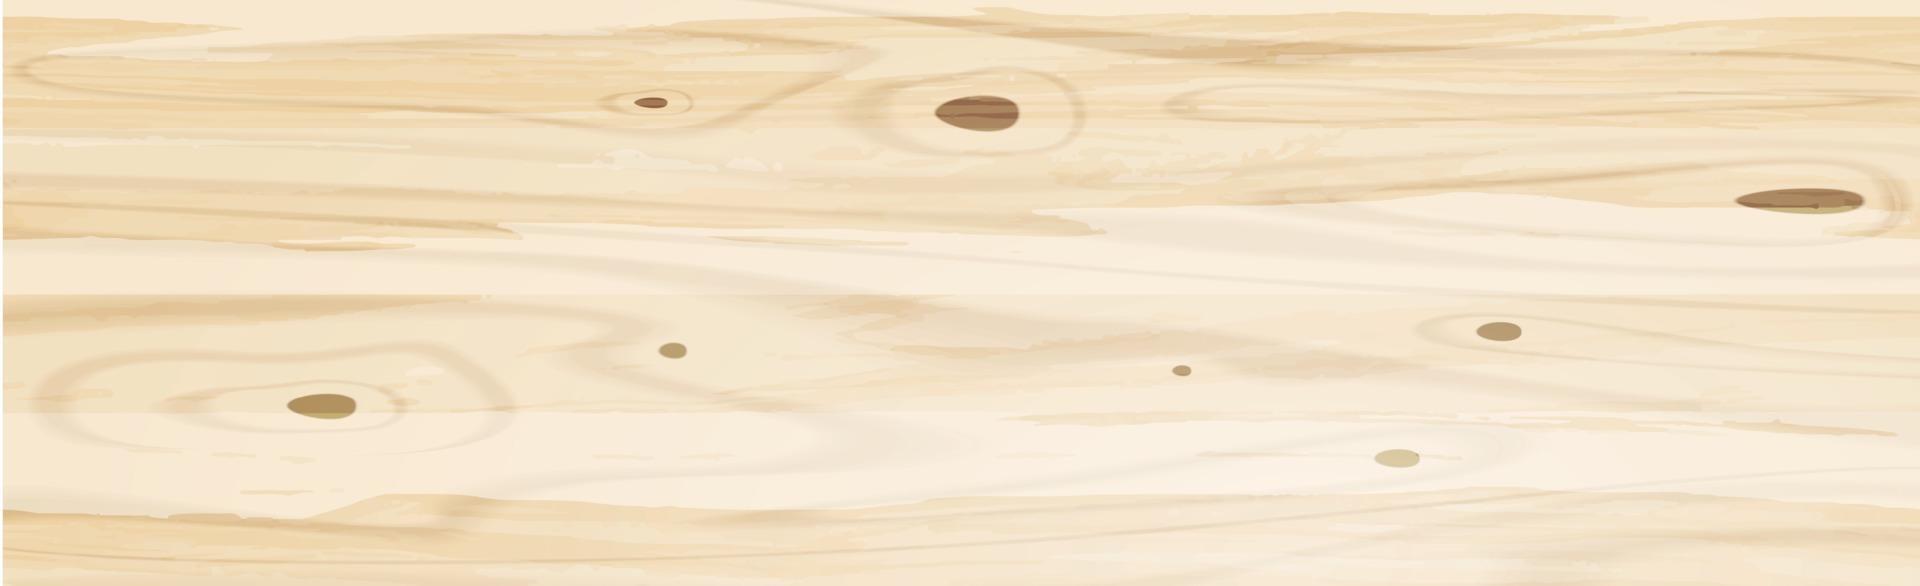 Panoramic texture of light wood with knots - Vector